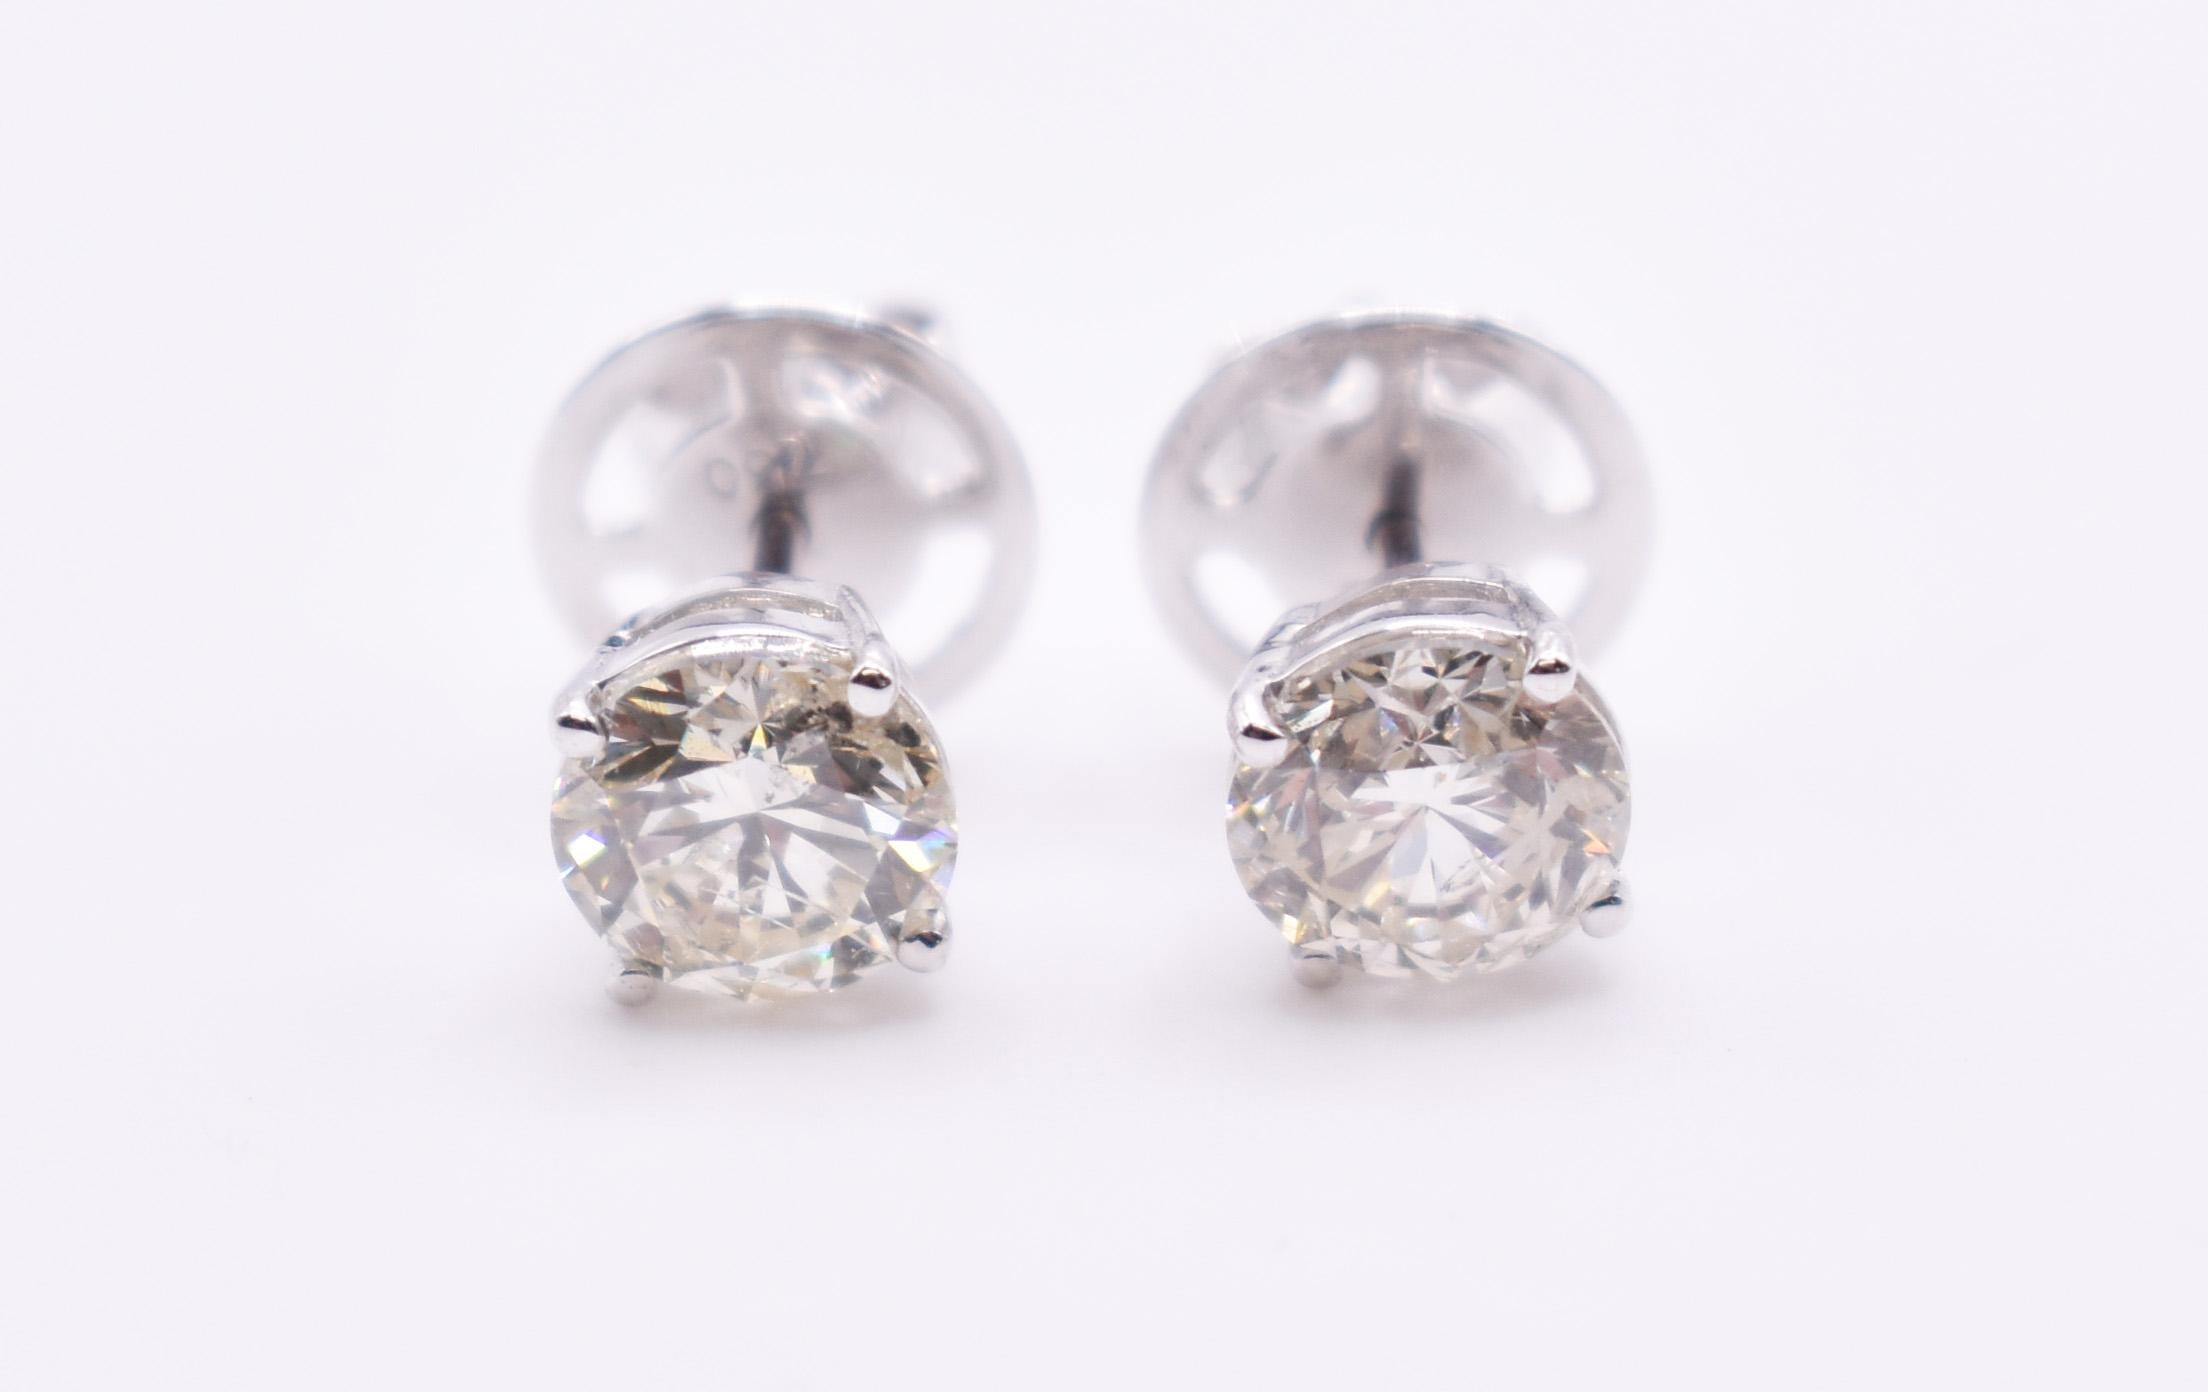 On offer for sale is lovely pair of 18k white gold pair of 2.18ct diamond stud earrings. 

Metal: 18K White Gold
Total Carat Weight: 2.18ct 
Colour: J/K
Clarity: SI2
